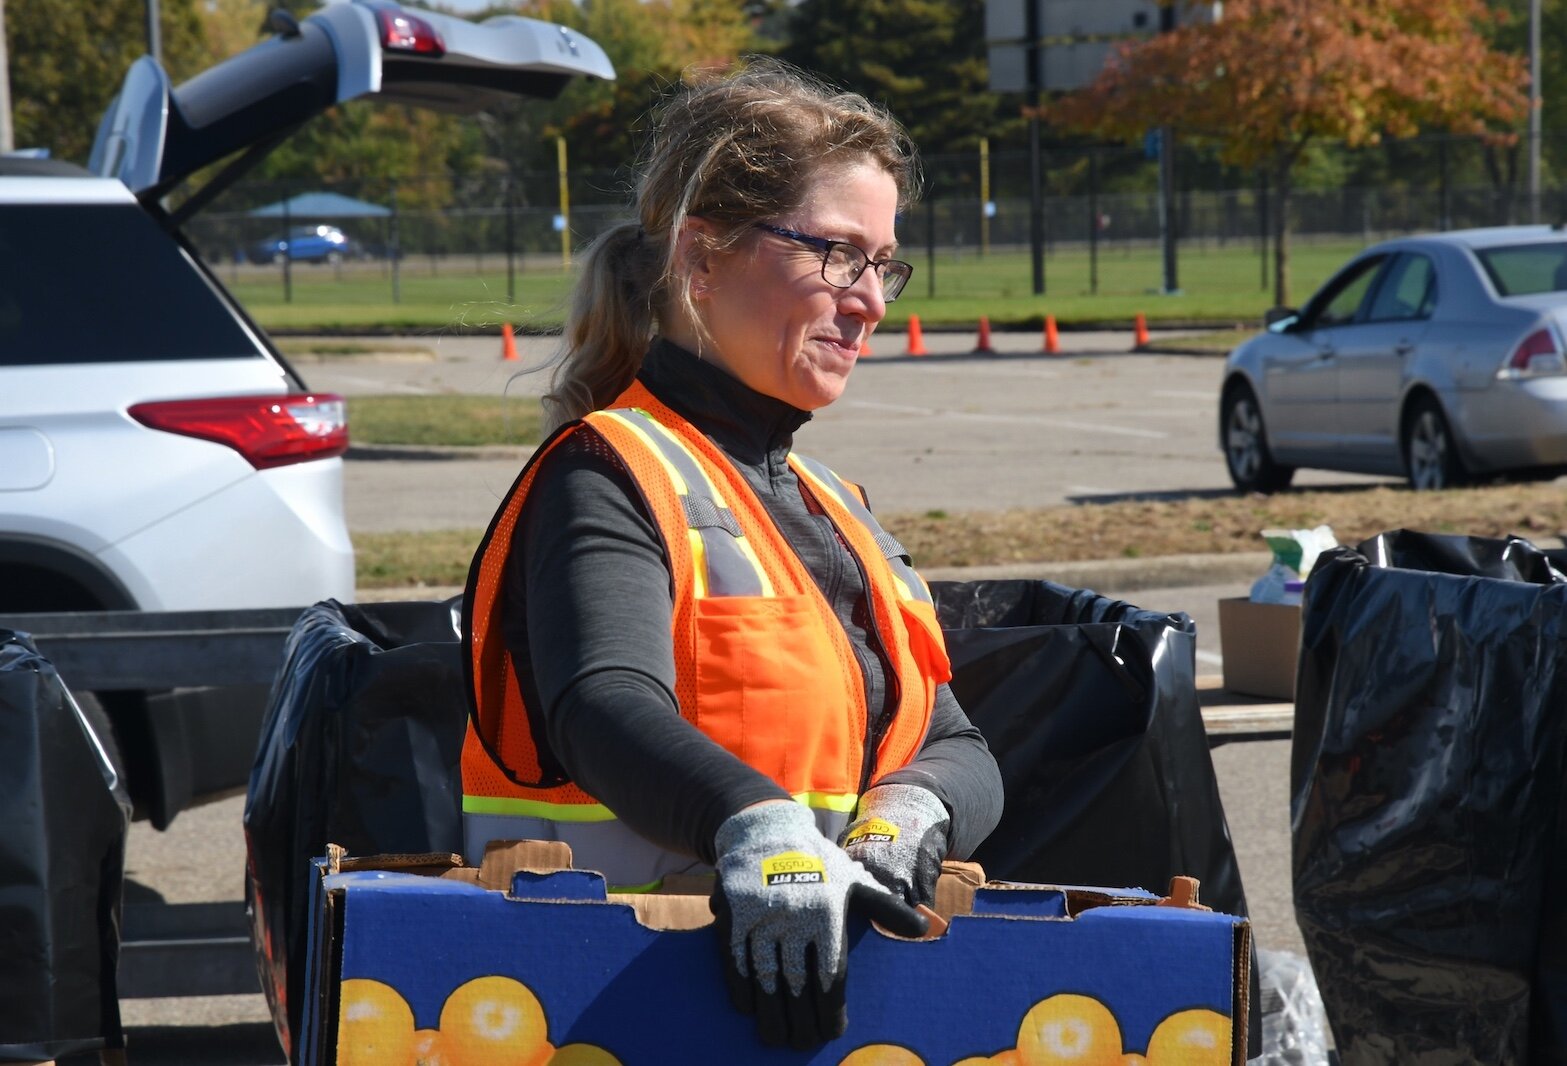 Sarah Lundy, the Calhoun County Recycling Coordinator, oversees a recent public hazardous waste disposal event at Bailey Park in Battle Creek.